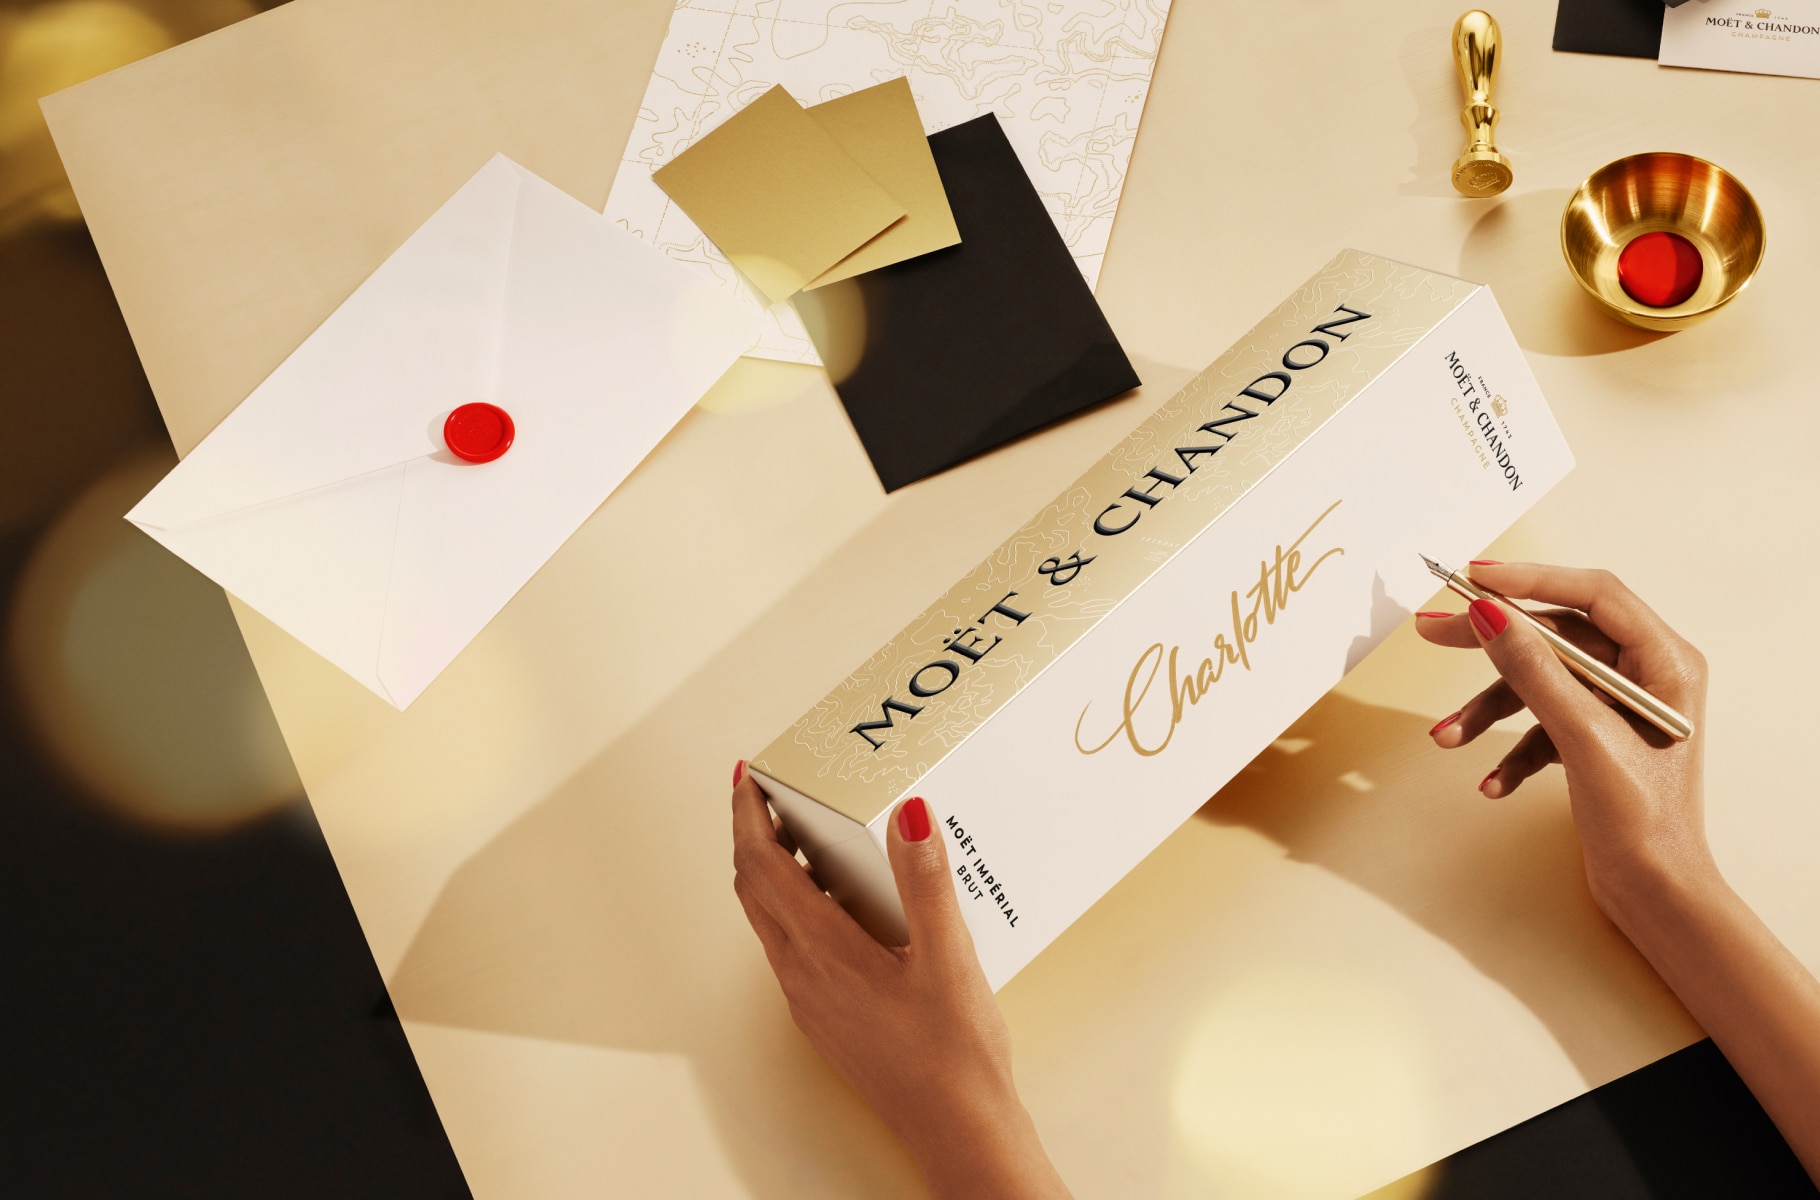 MOËT & CHANDON  Moët & Chandon has released two types of limited gift  boxes, the perfect gifts for your loved ones!